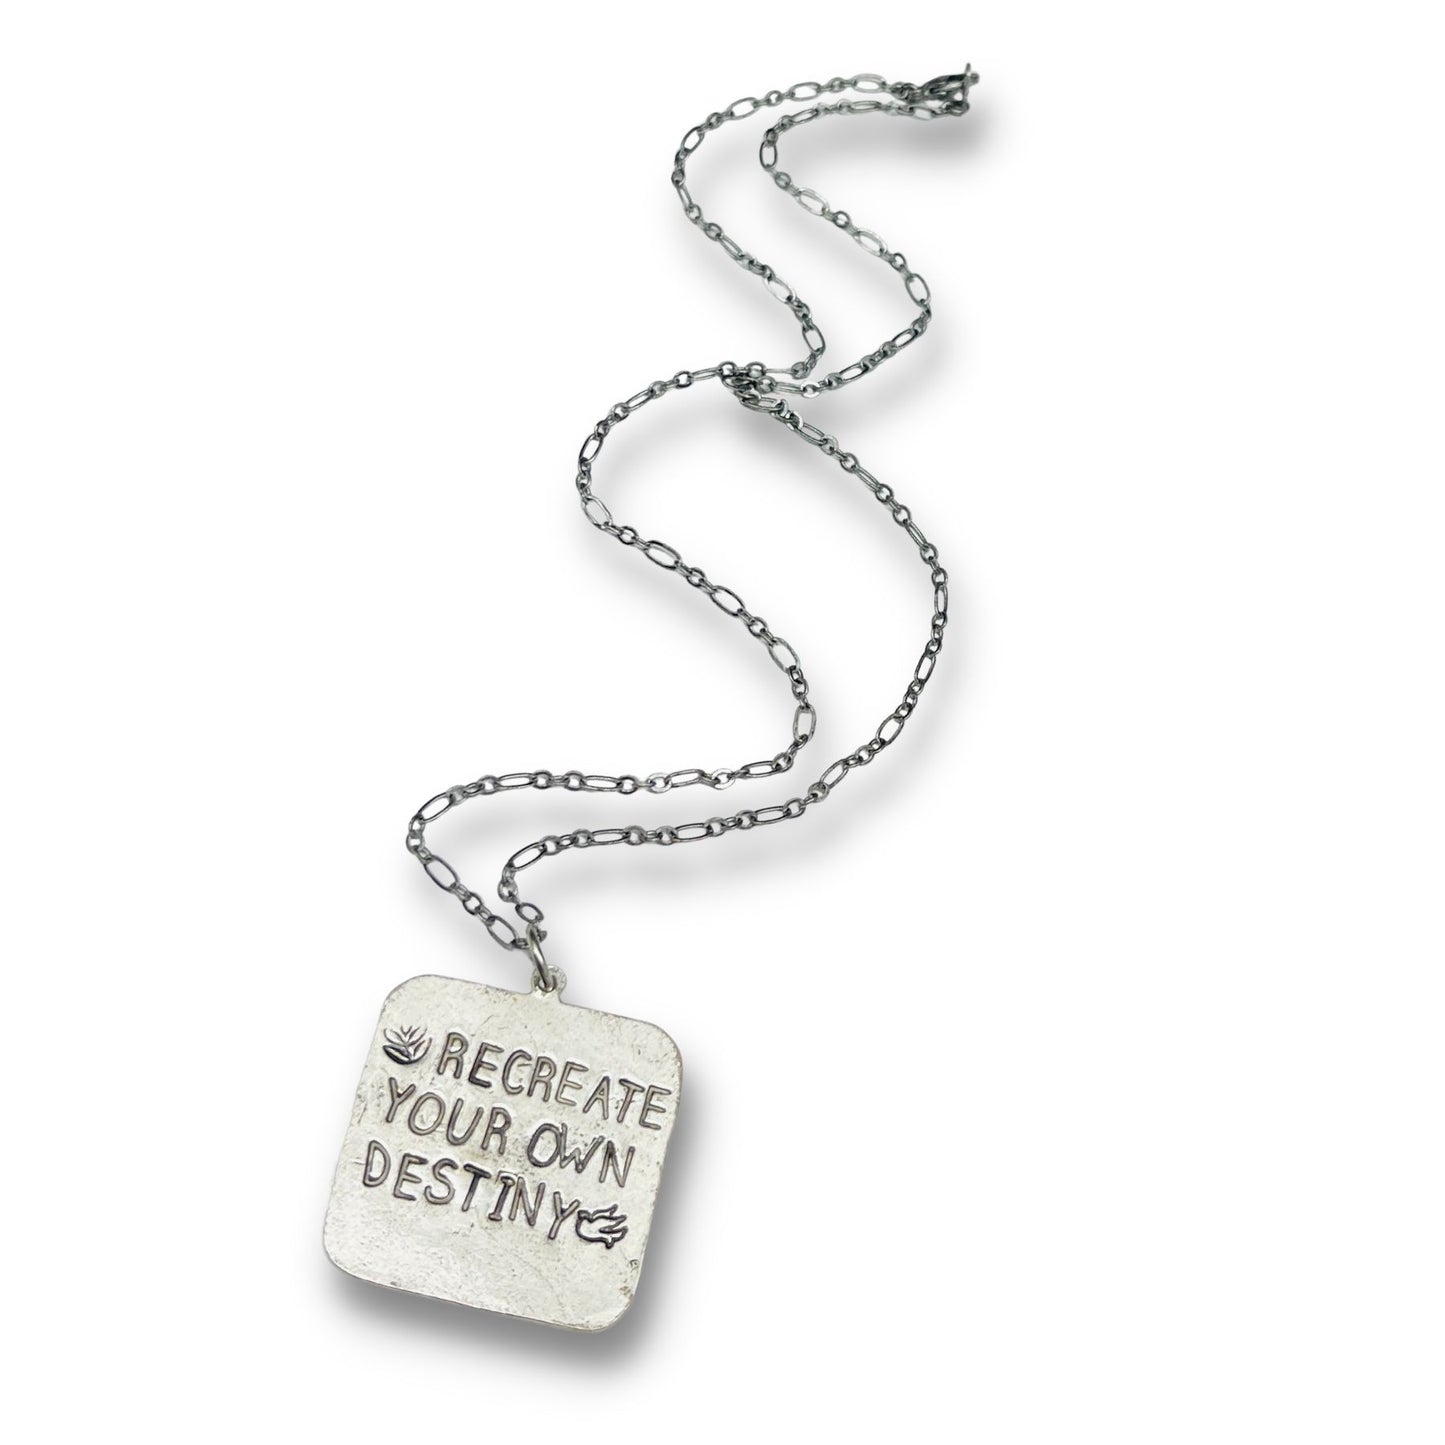 Recreate Your Own Destiny Hand Stamped Pendant Necklace